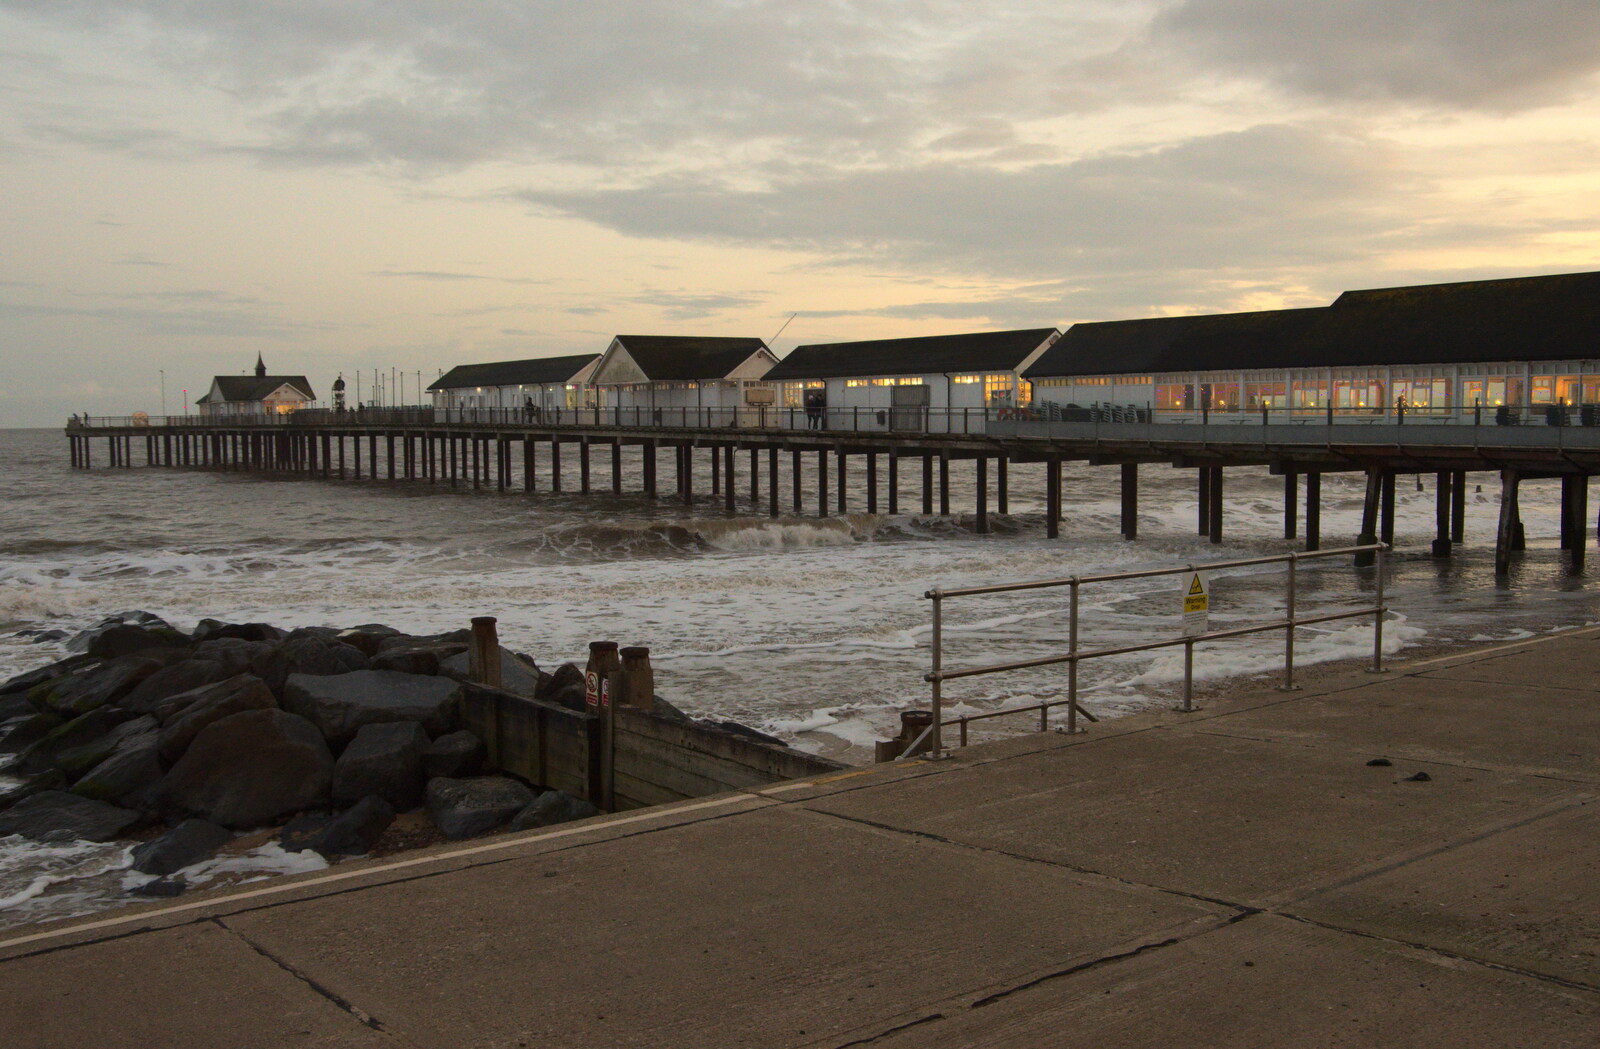 Southwold Pier in the dusk from A Return to the Beach, Southwold, Suffolk - 20th December 2020